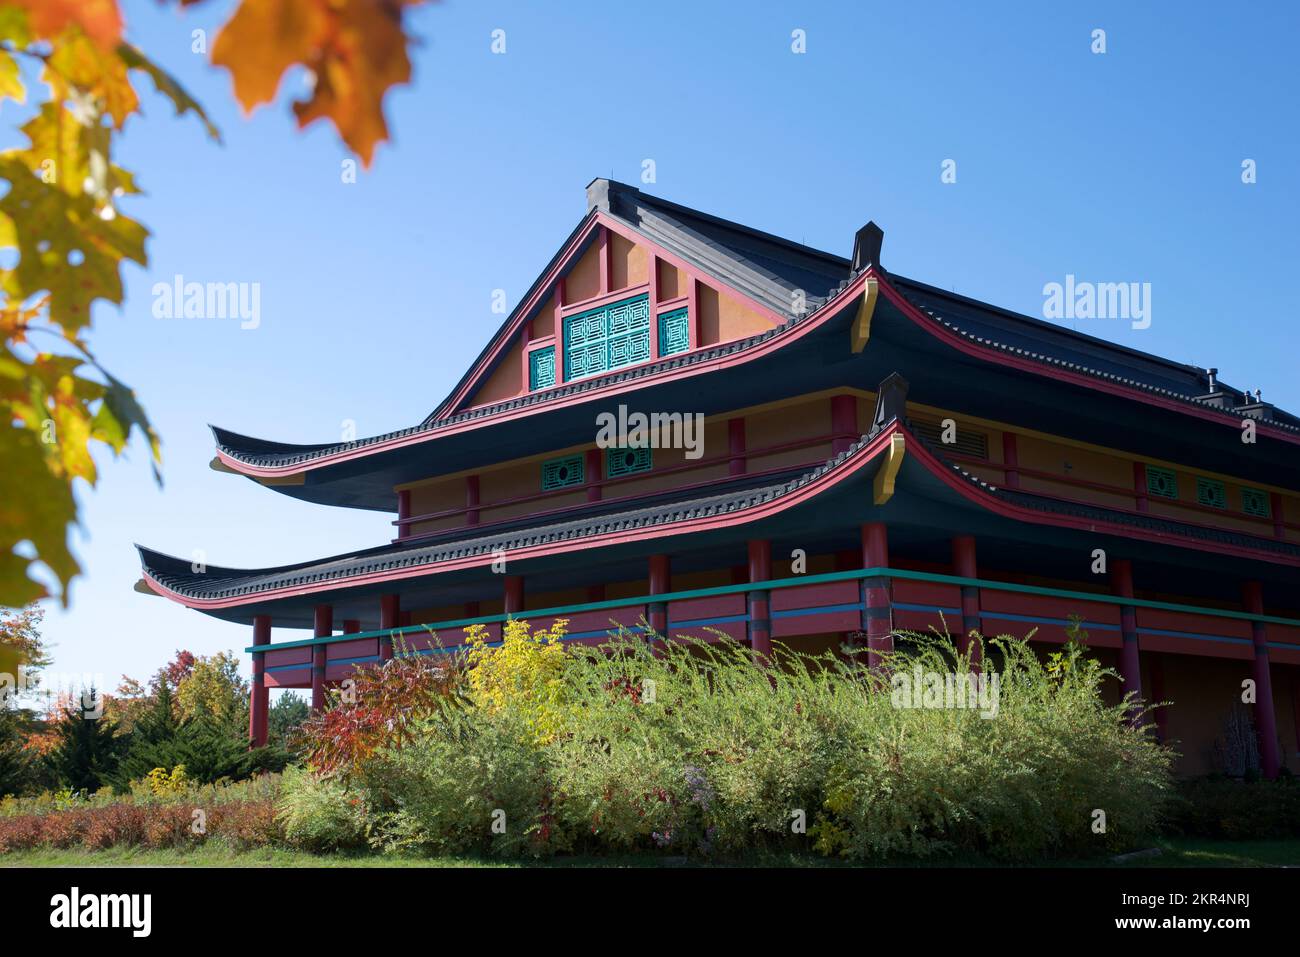 Exterior of the buddha temple with autumn leaf colour Stock Photo